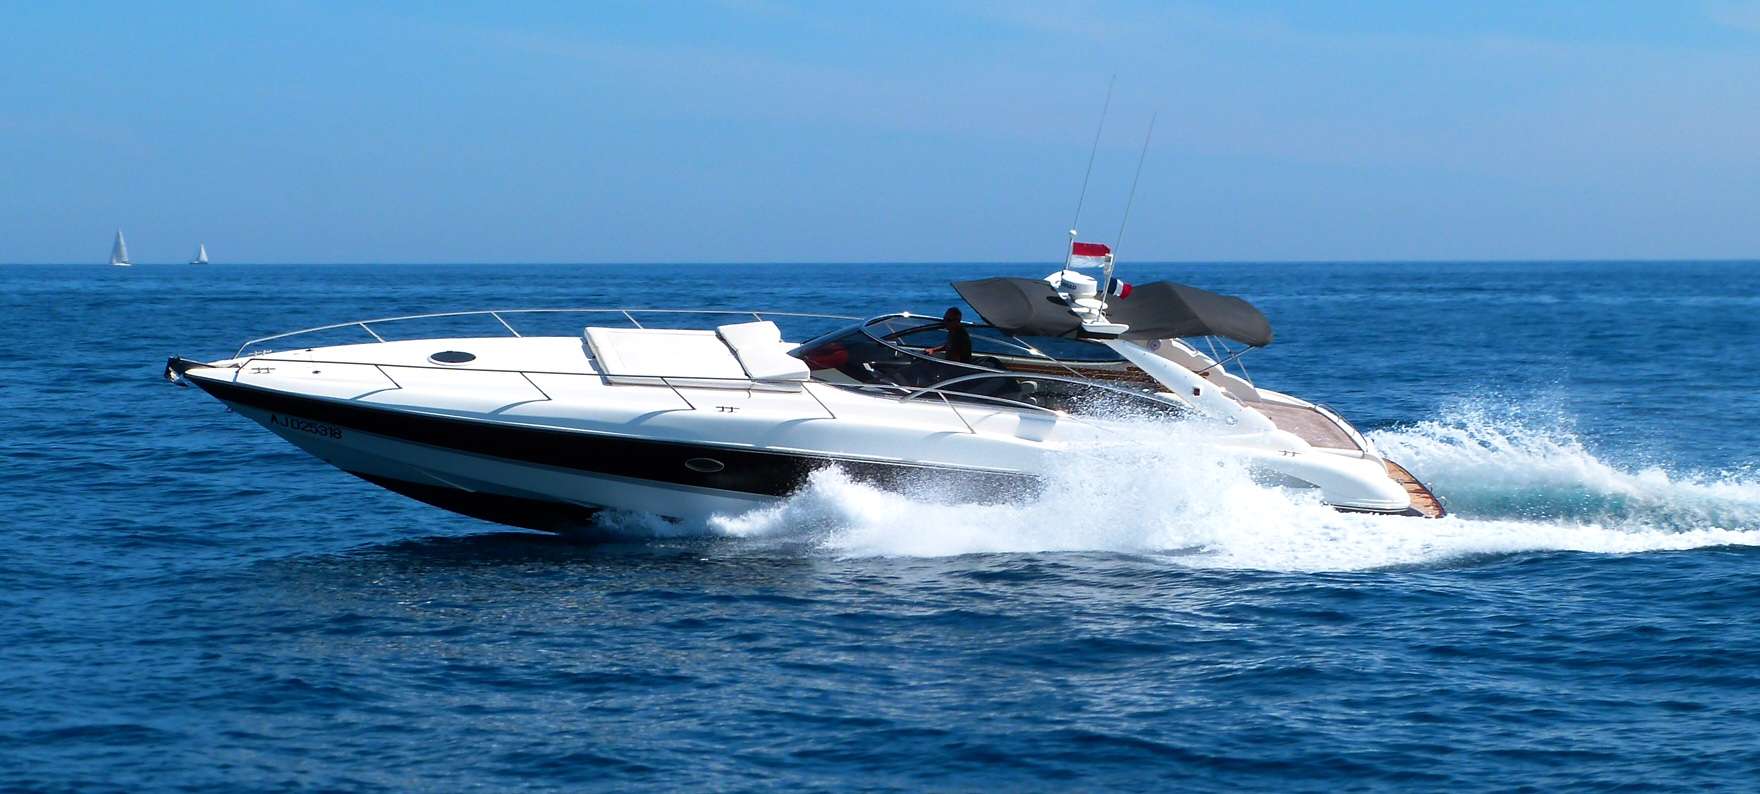 Sunseeker 48 - Luxury yacht charter France & Boat hire in France French Riviera Cannes Vieux port de Vallauris 4